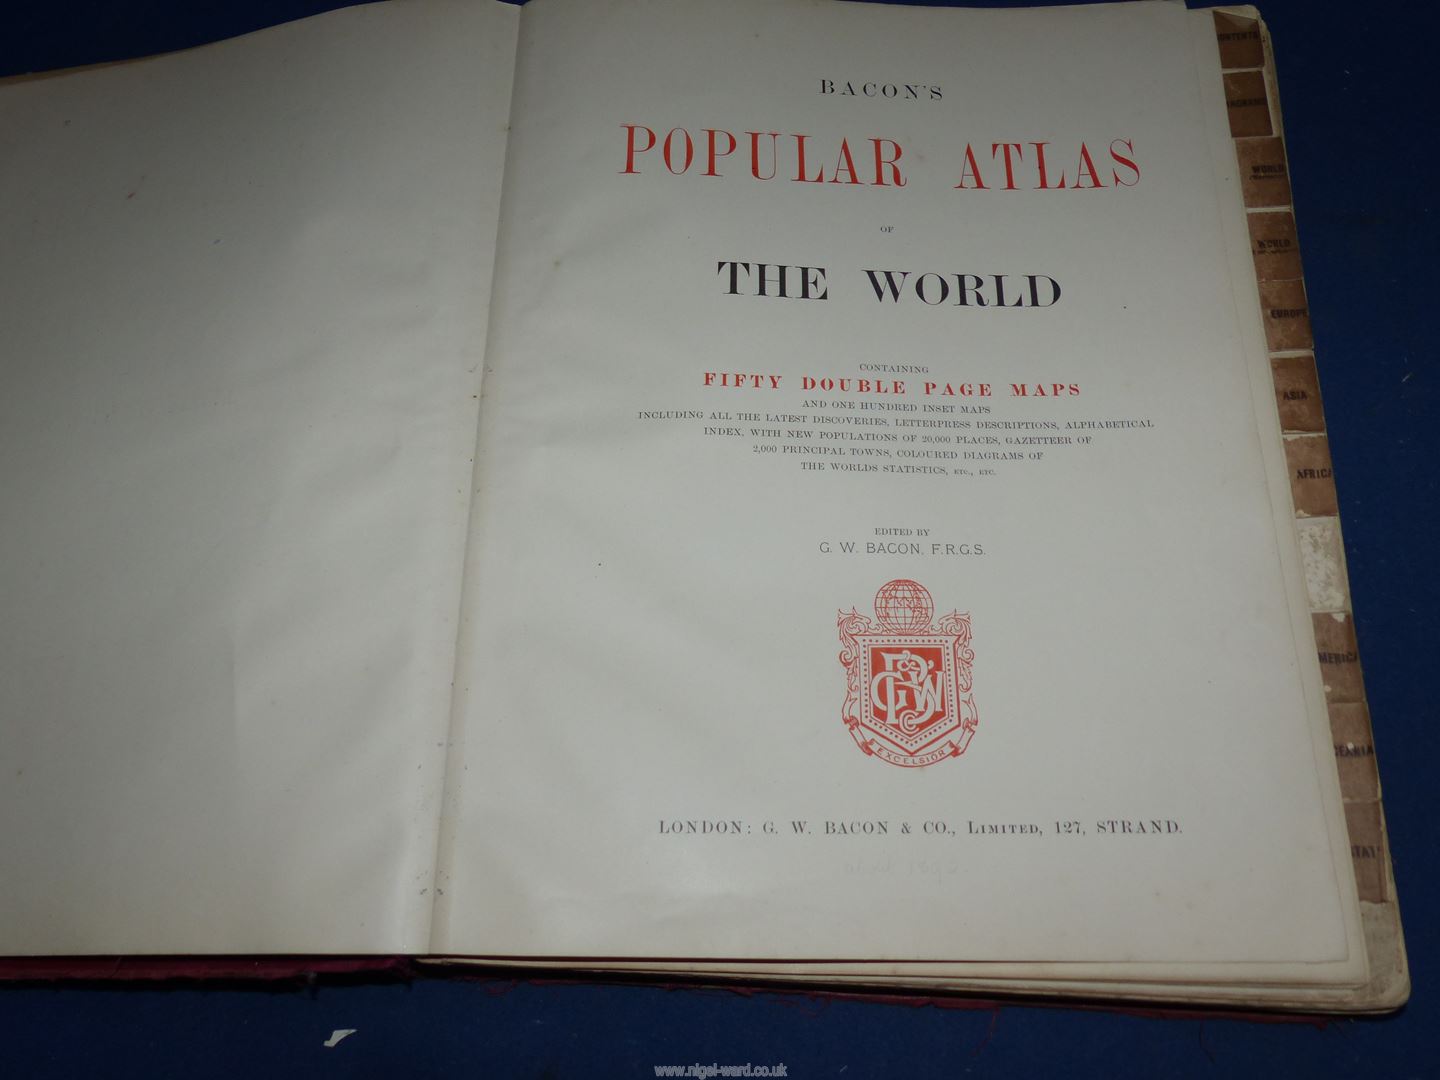 Bacon's Popular Atlas of The World. - Image 2 of 4